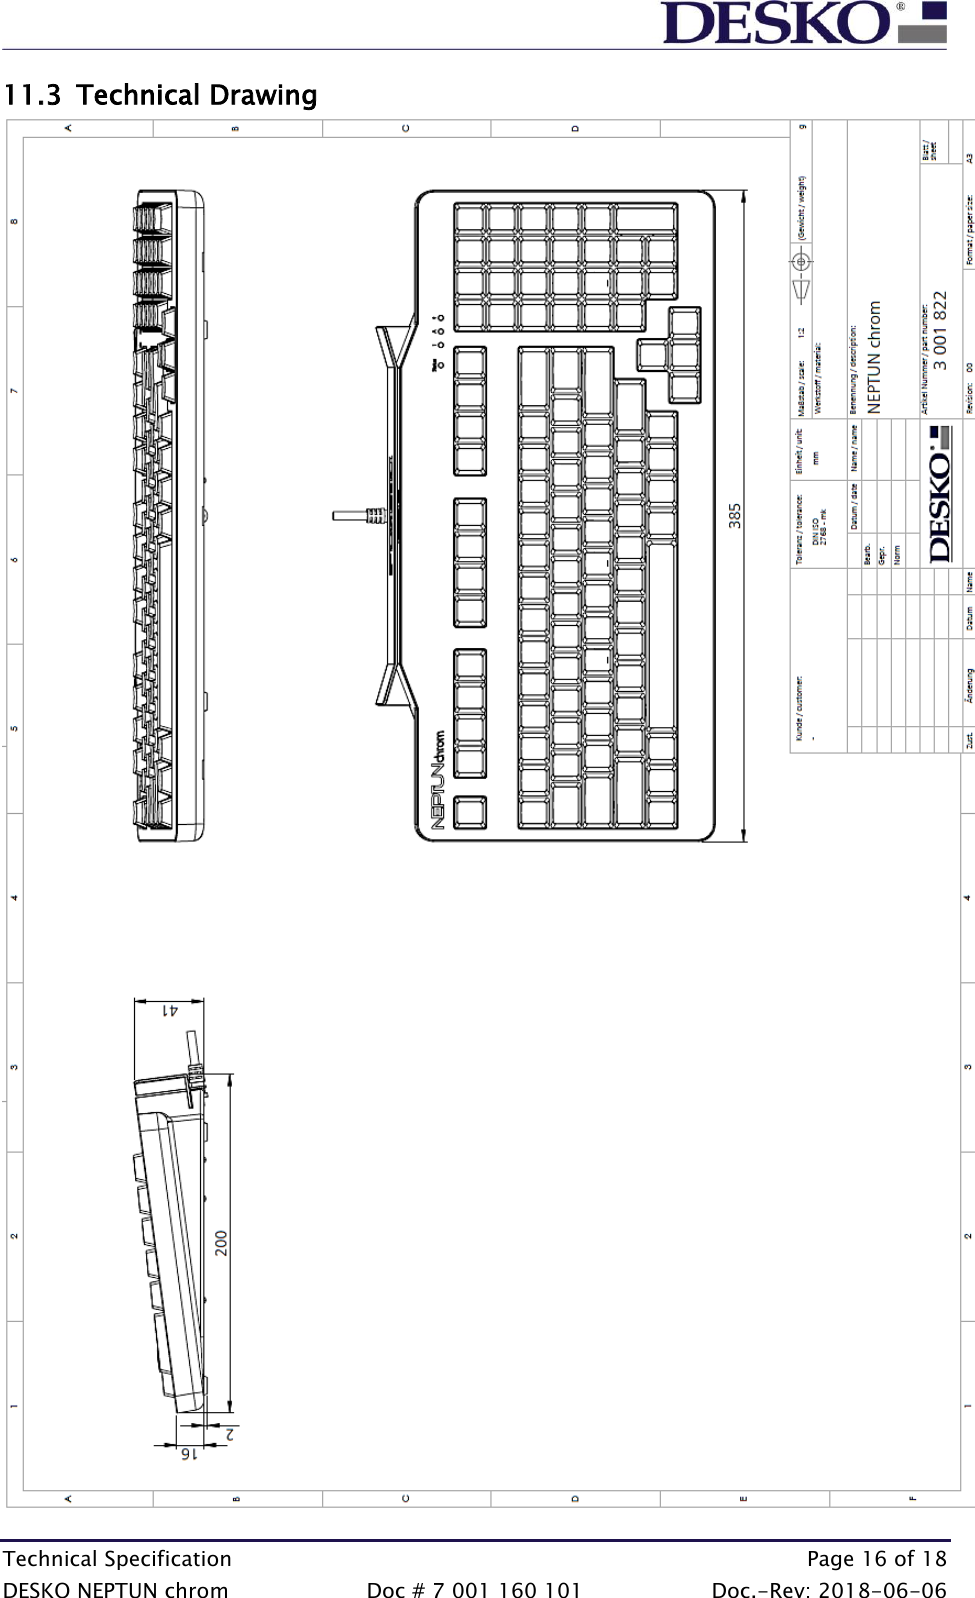  Technical Specification    Page 16 of 18 DESKO NEPTUN chrom  Doc # 7 001 160 101  Doc.-Rev: 2018-06-06 11.3 Technical Drawing  